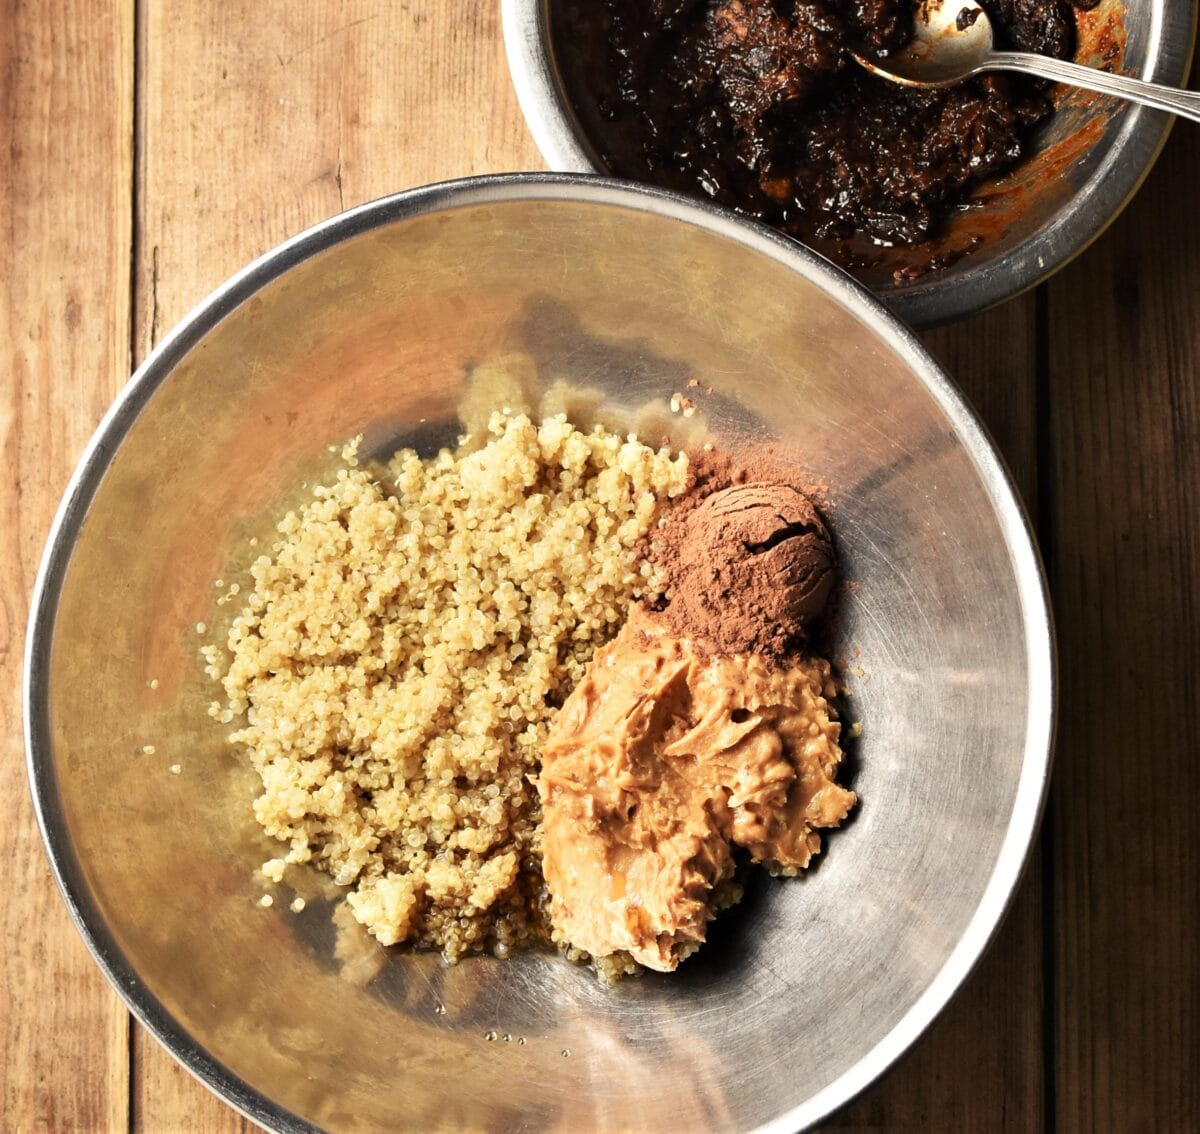 Cooked quinoa, peanut butter and cocoa in large metal bowl, with dates in small metal bowl in top right corner.